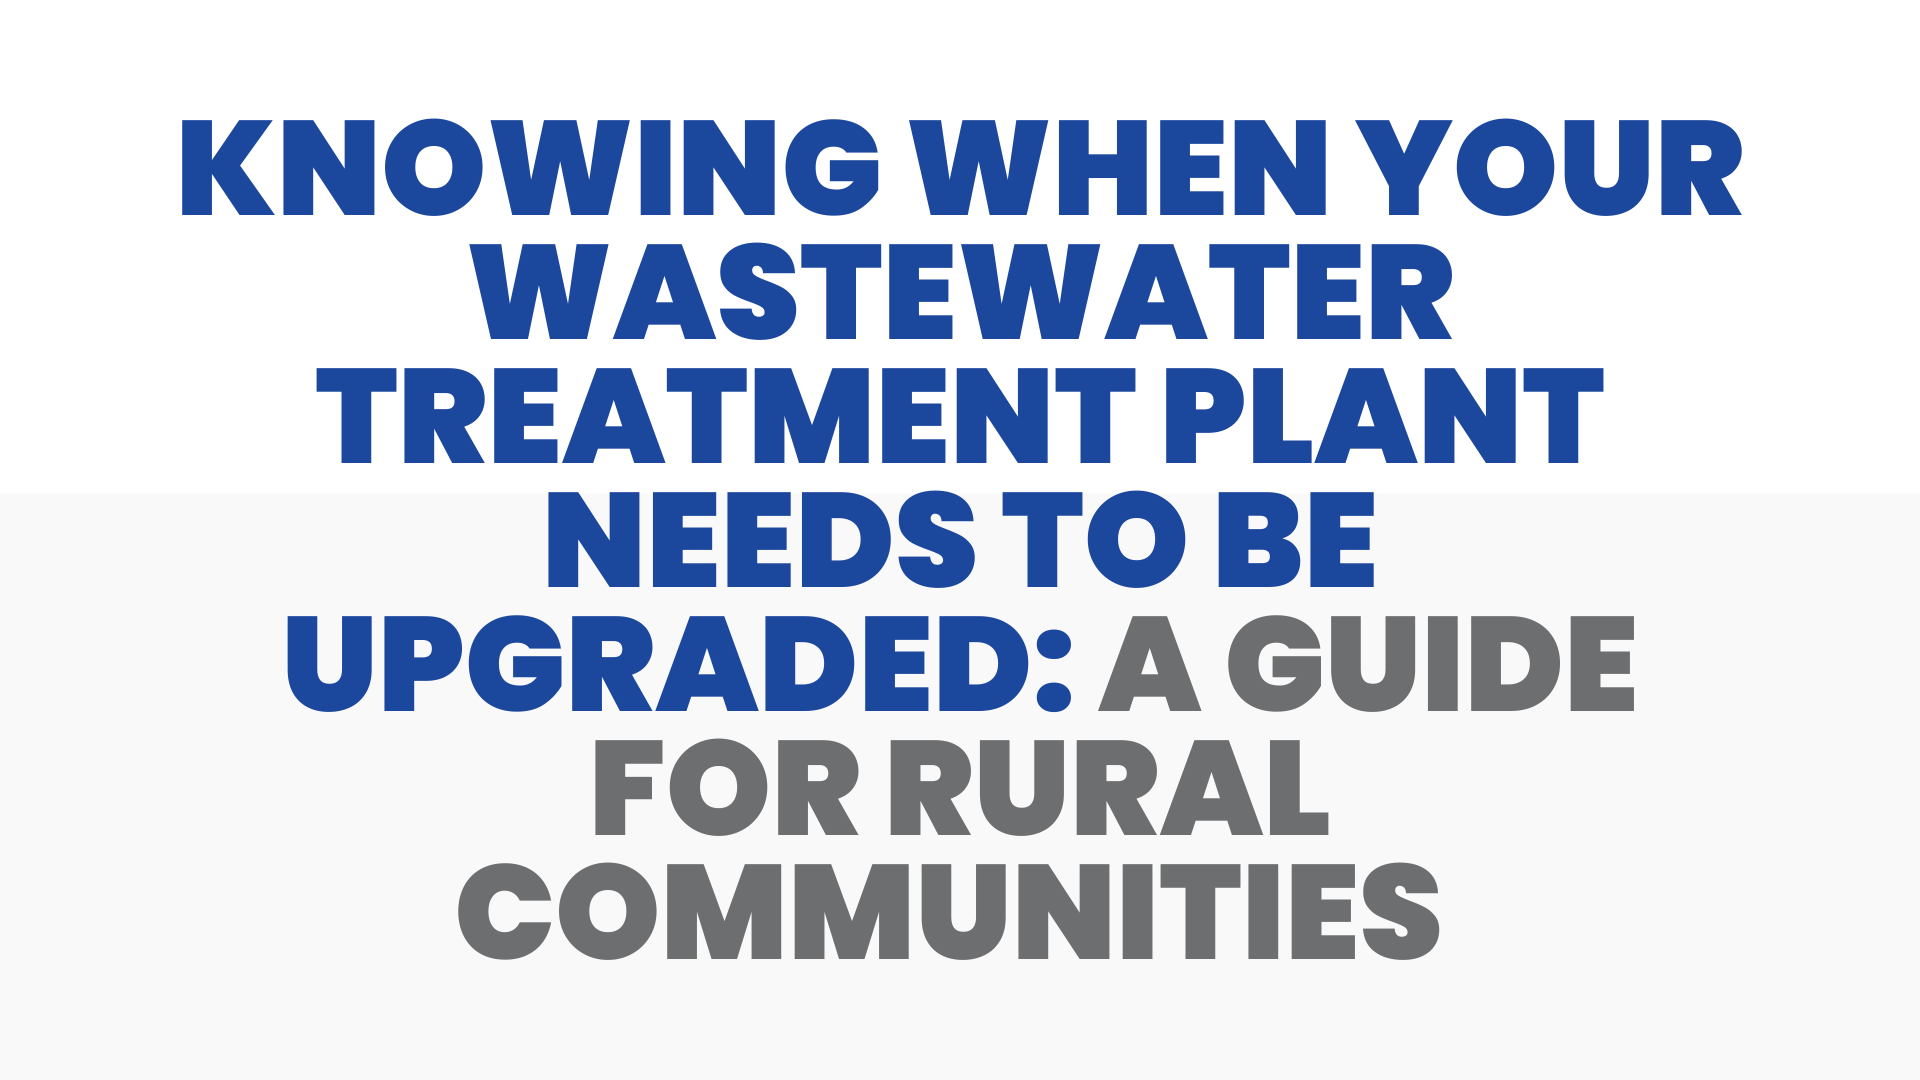 Knowing When Your Wastewater Treatment Plant Needs to be Upgraded: A Guide for Rural Communities